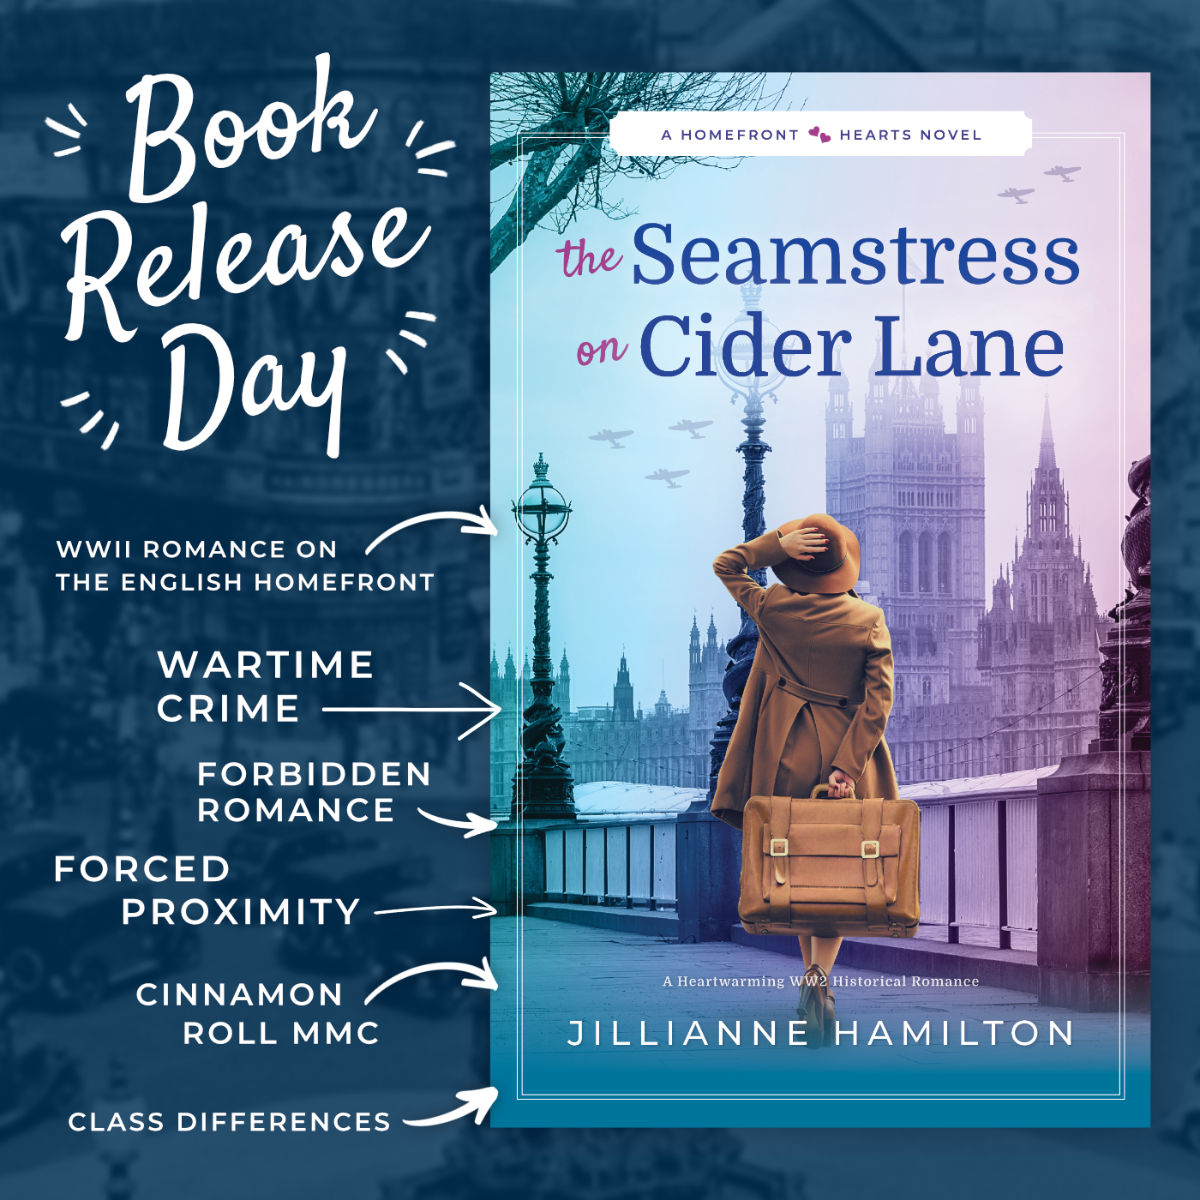 The Seamstress on Cider Lane is Here!